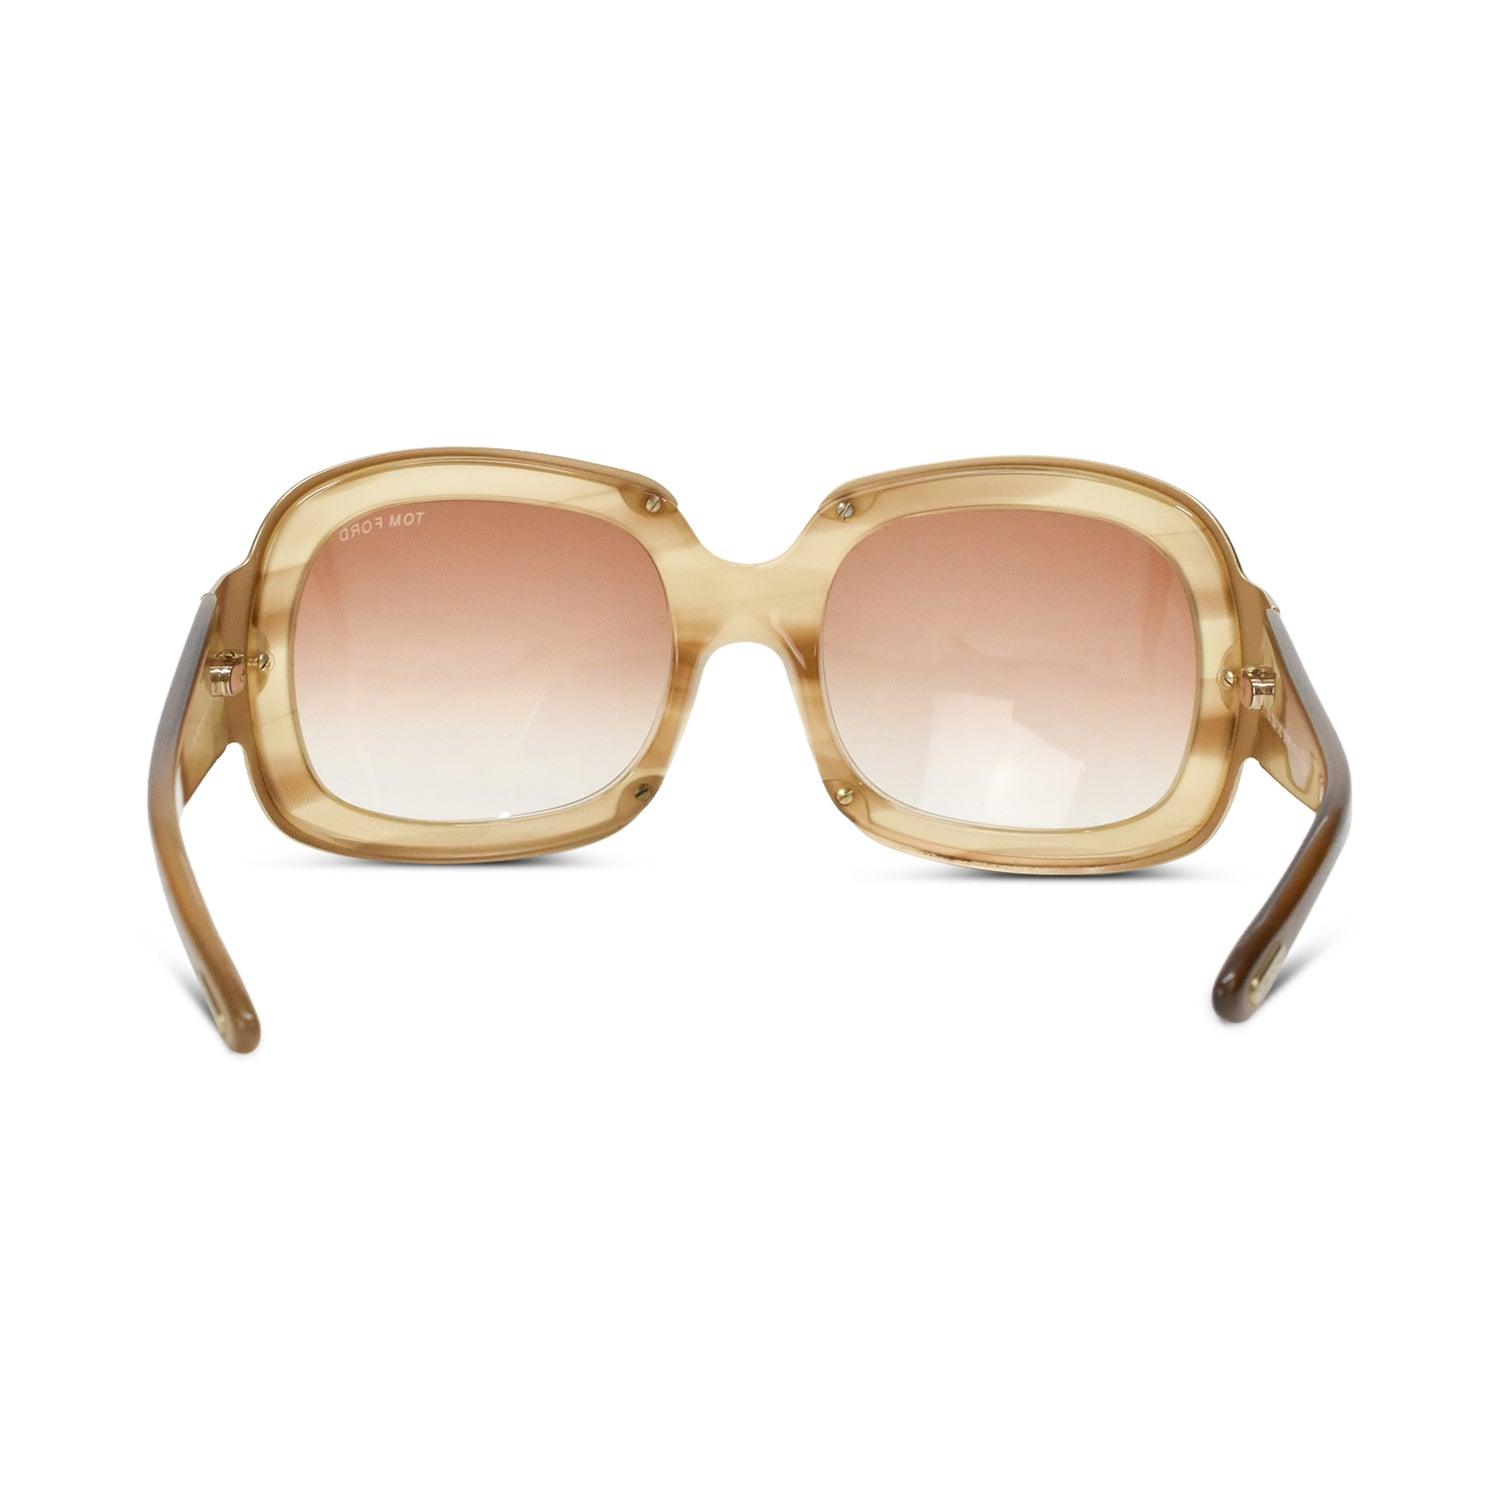 Tom Ford Sunglasses - Fashionably Yours